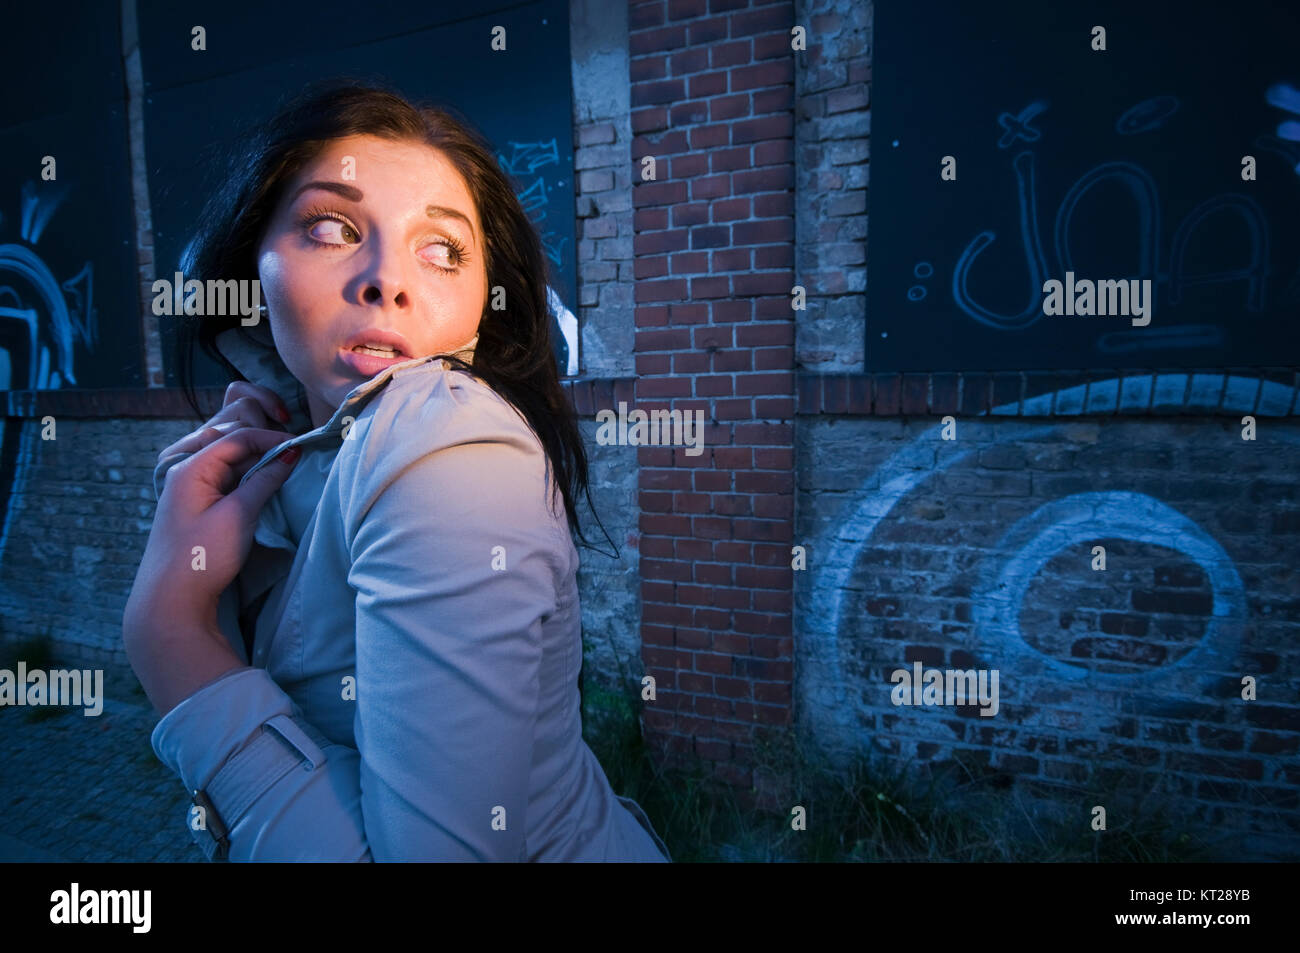 fright in the night Stock Photo